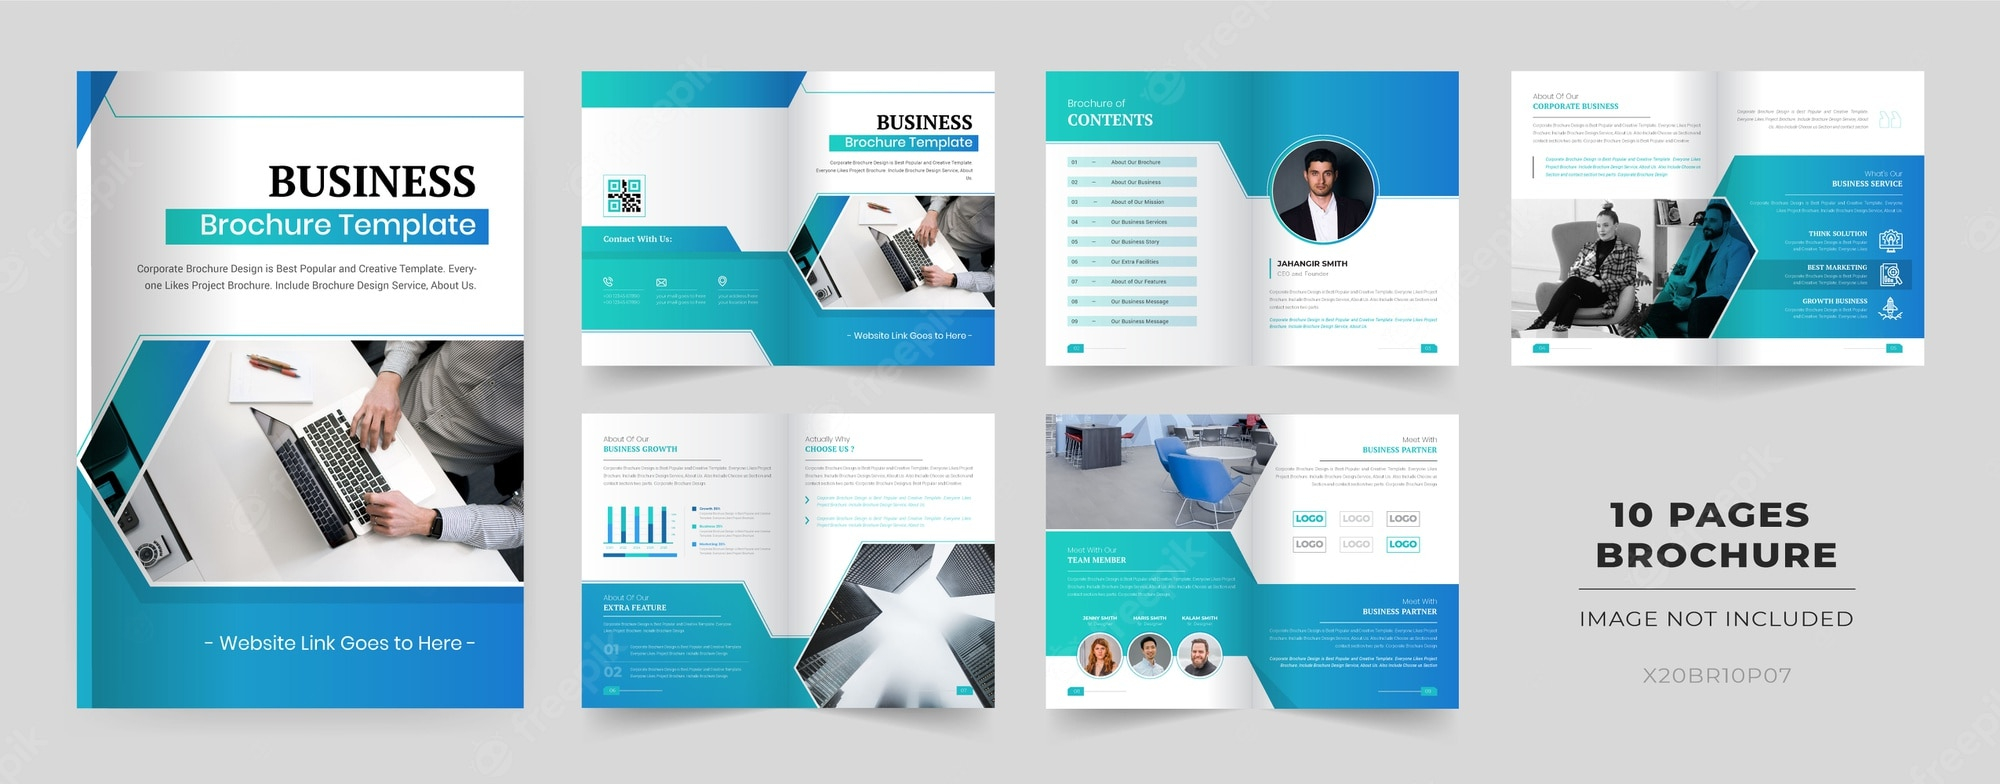 Brochure template Vectors & Illustrations for Free Download  Freepik Within Brochure Templates Ai Free Download